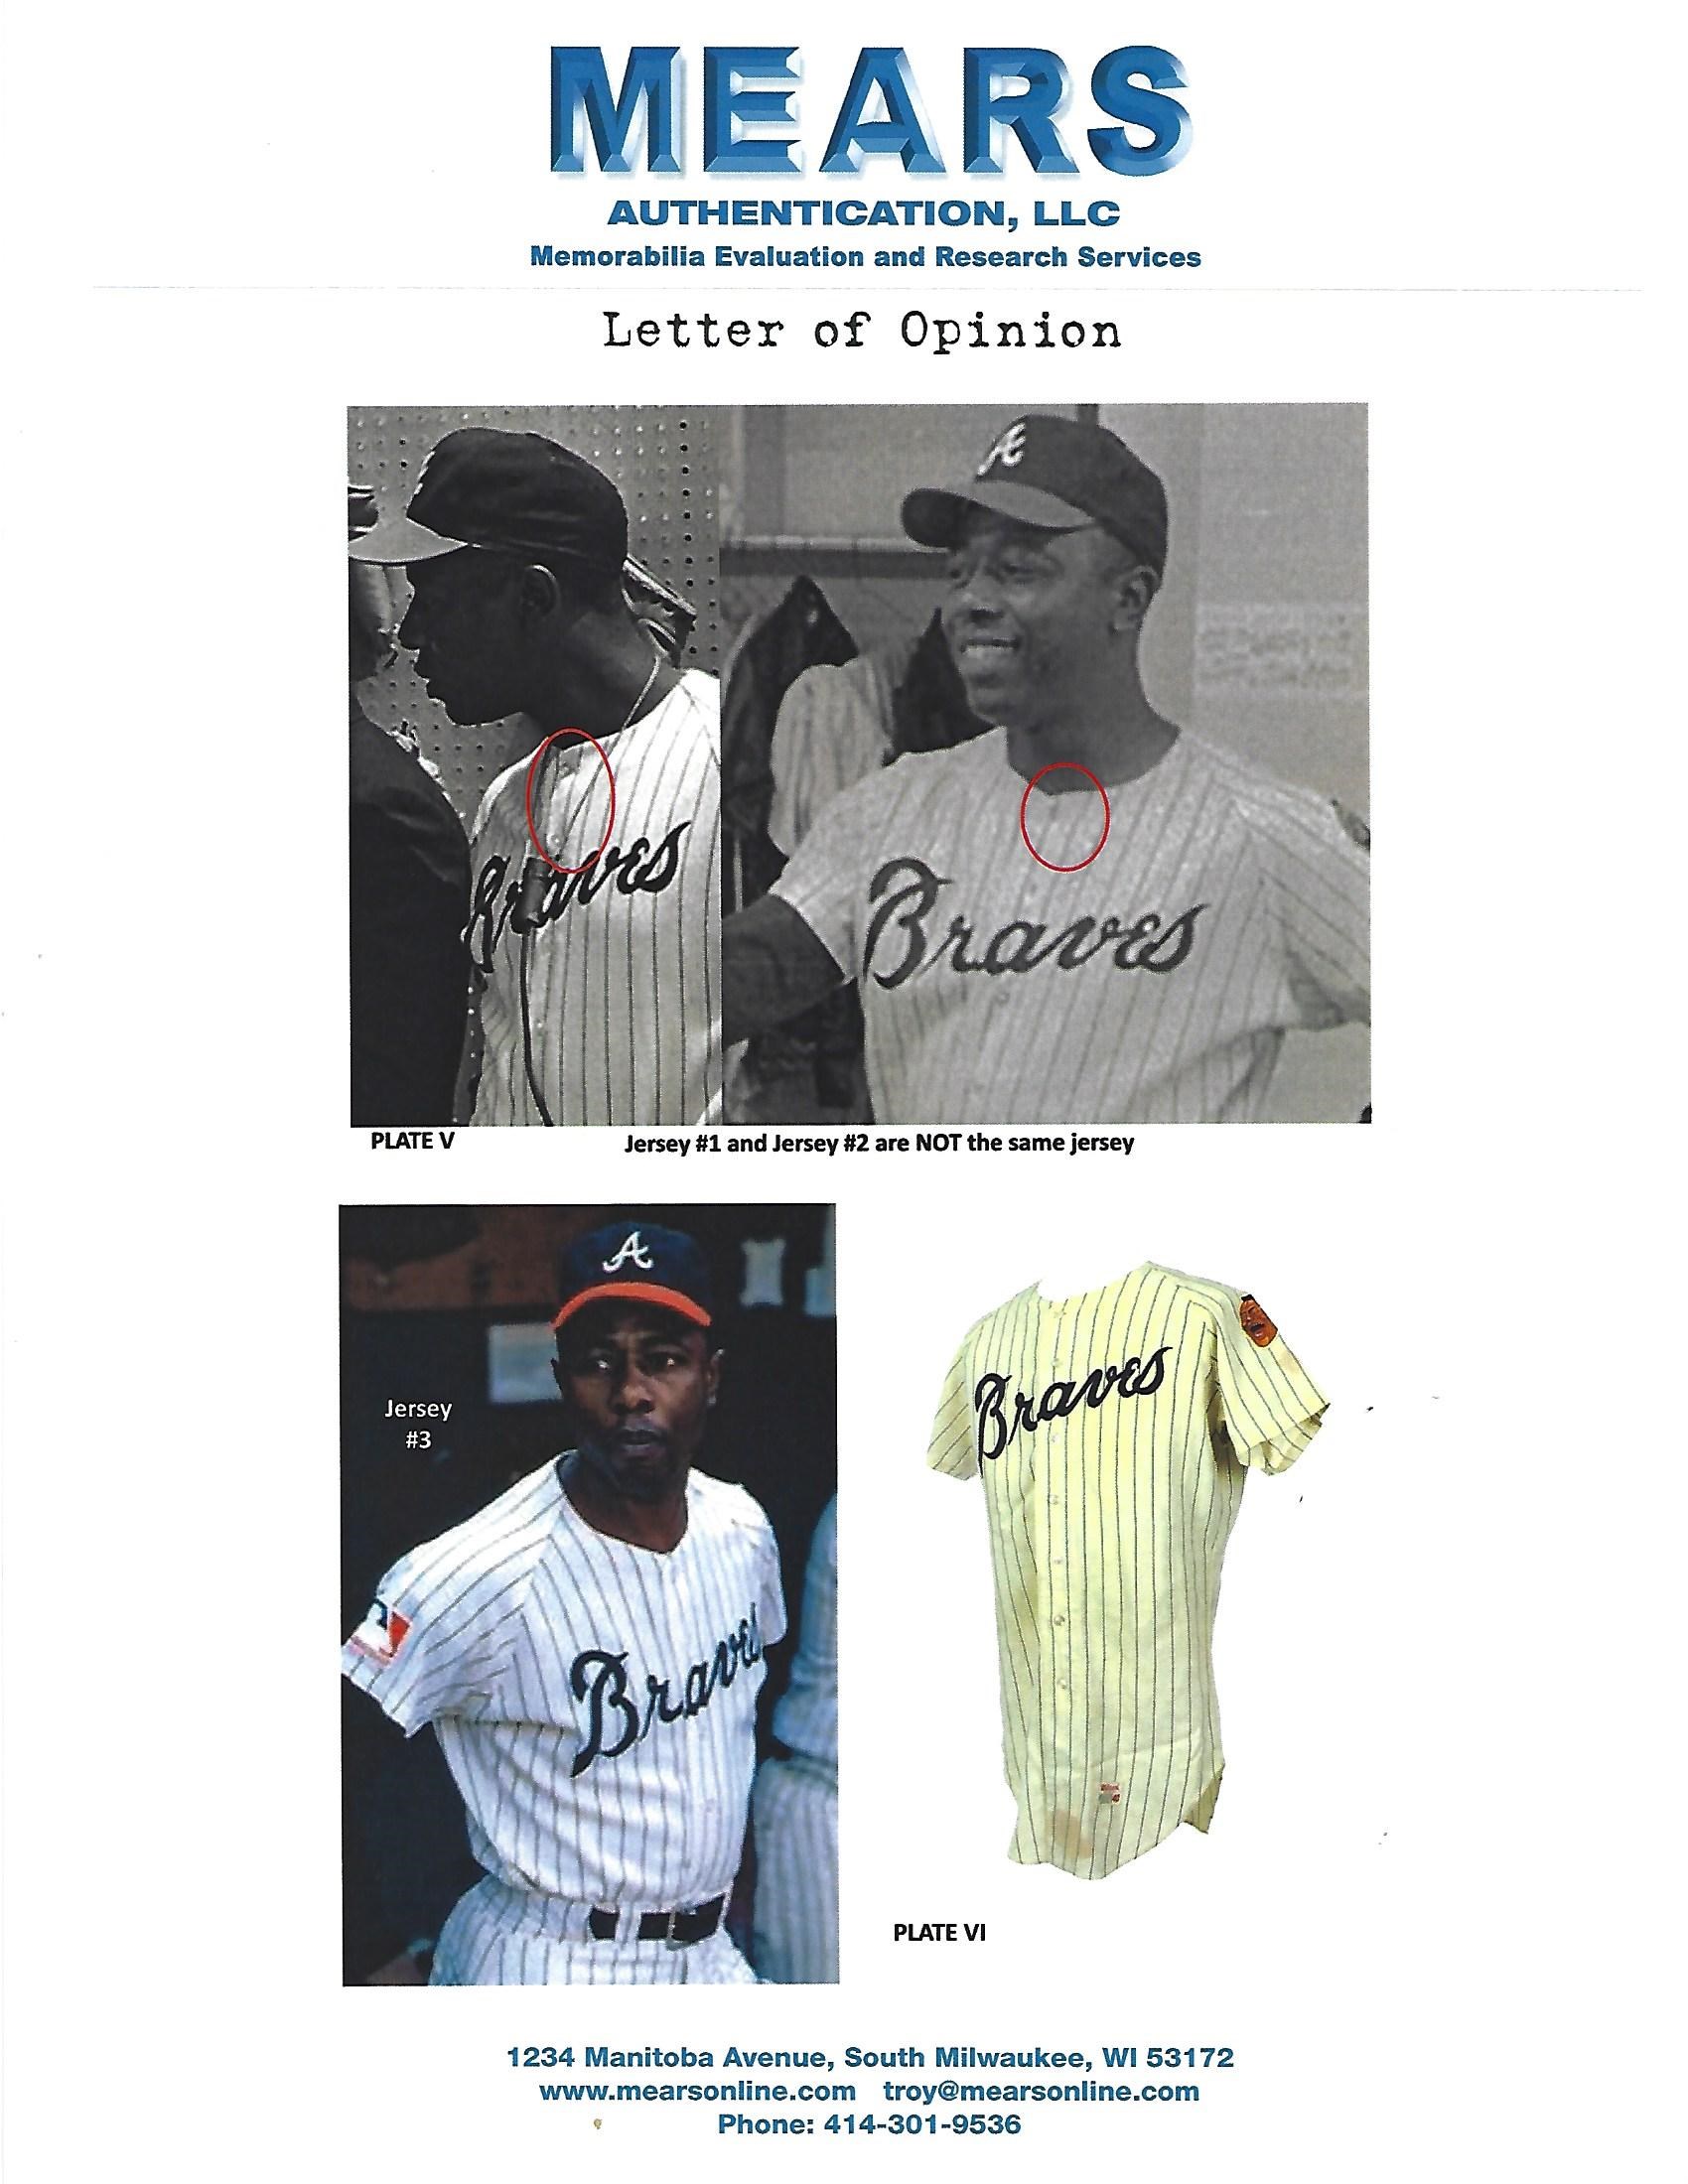 1972 Hank Aaron Game Used & Signed Atlanta Braves Home Jersey (MEARS A9 &  JSA), Sotheby's & Goldin Auctions Present: A Century of Champions, 2020